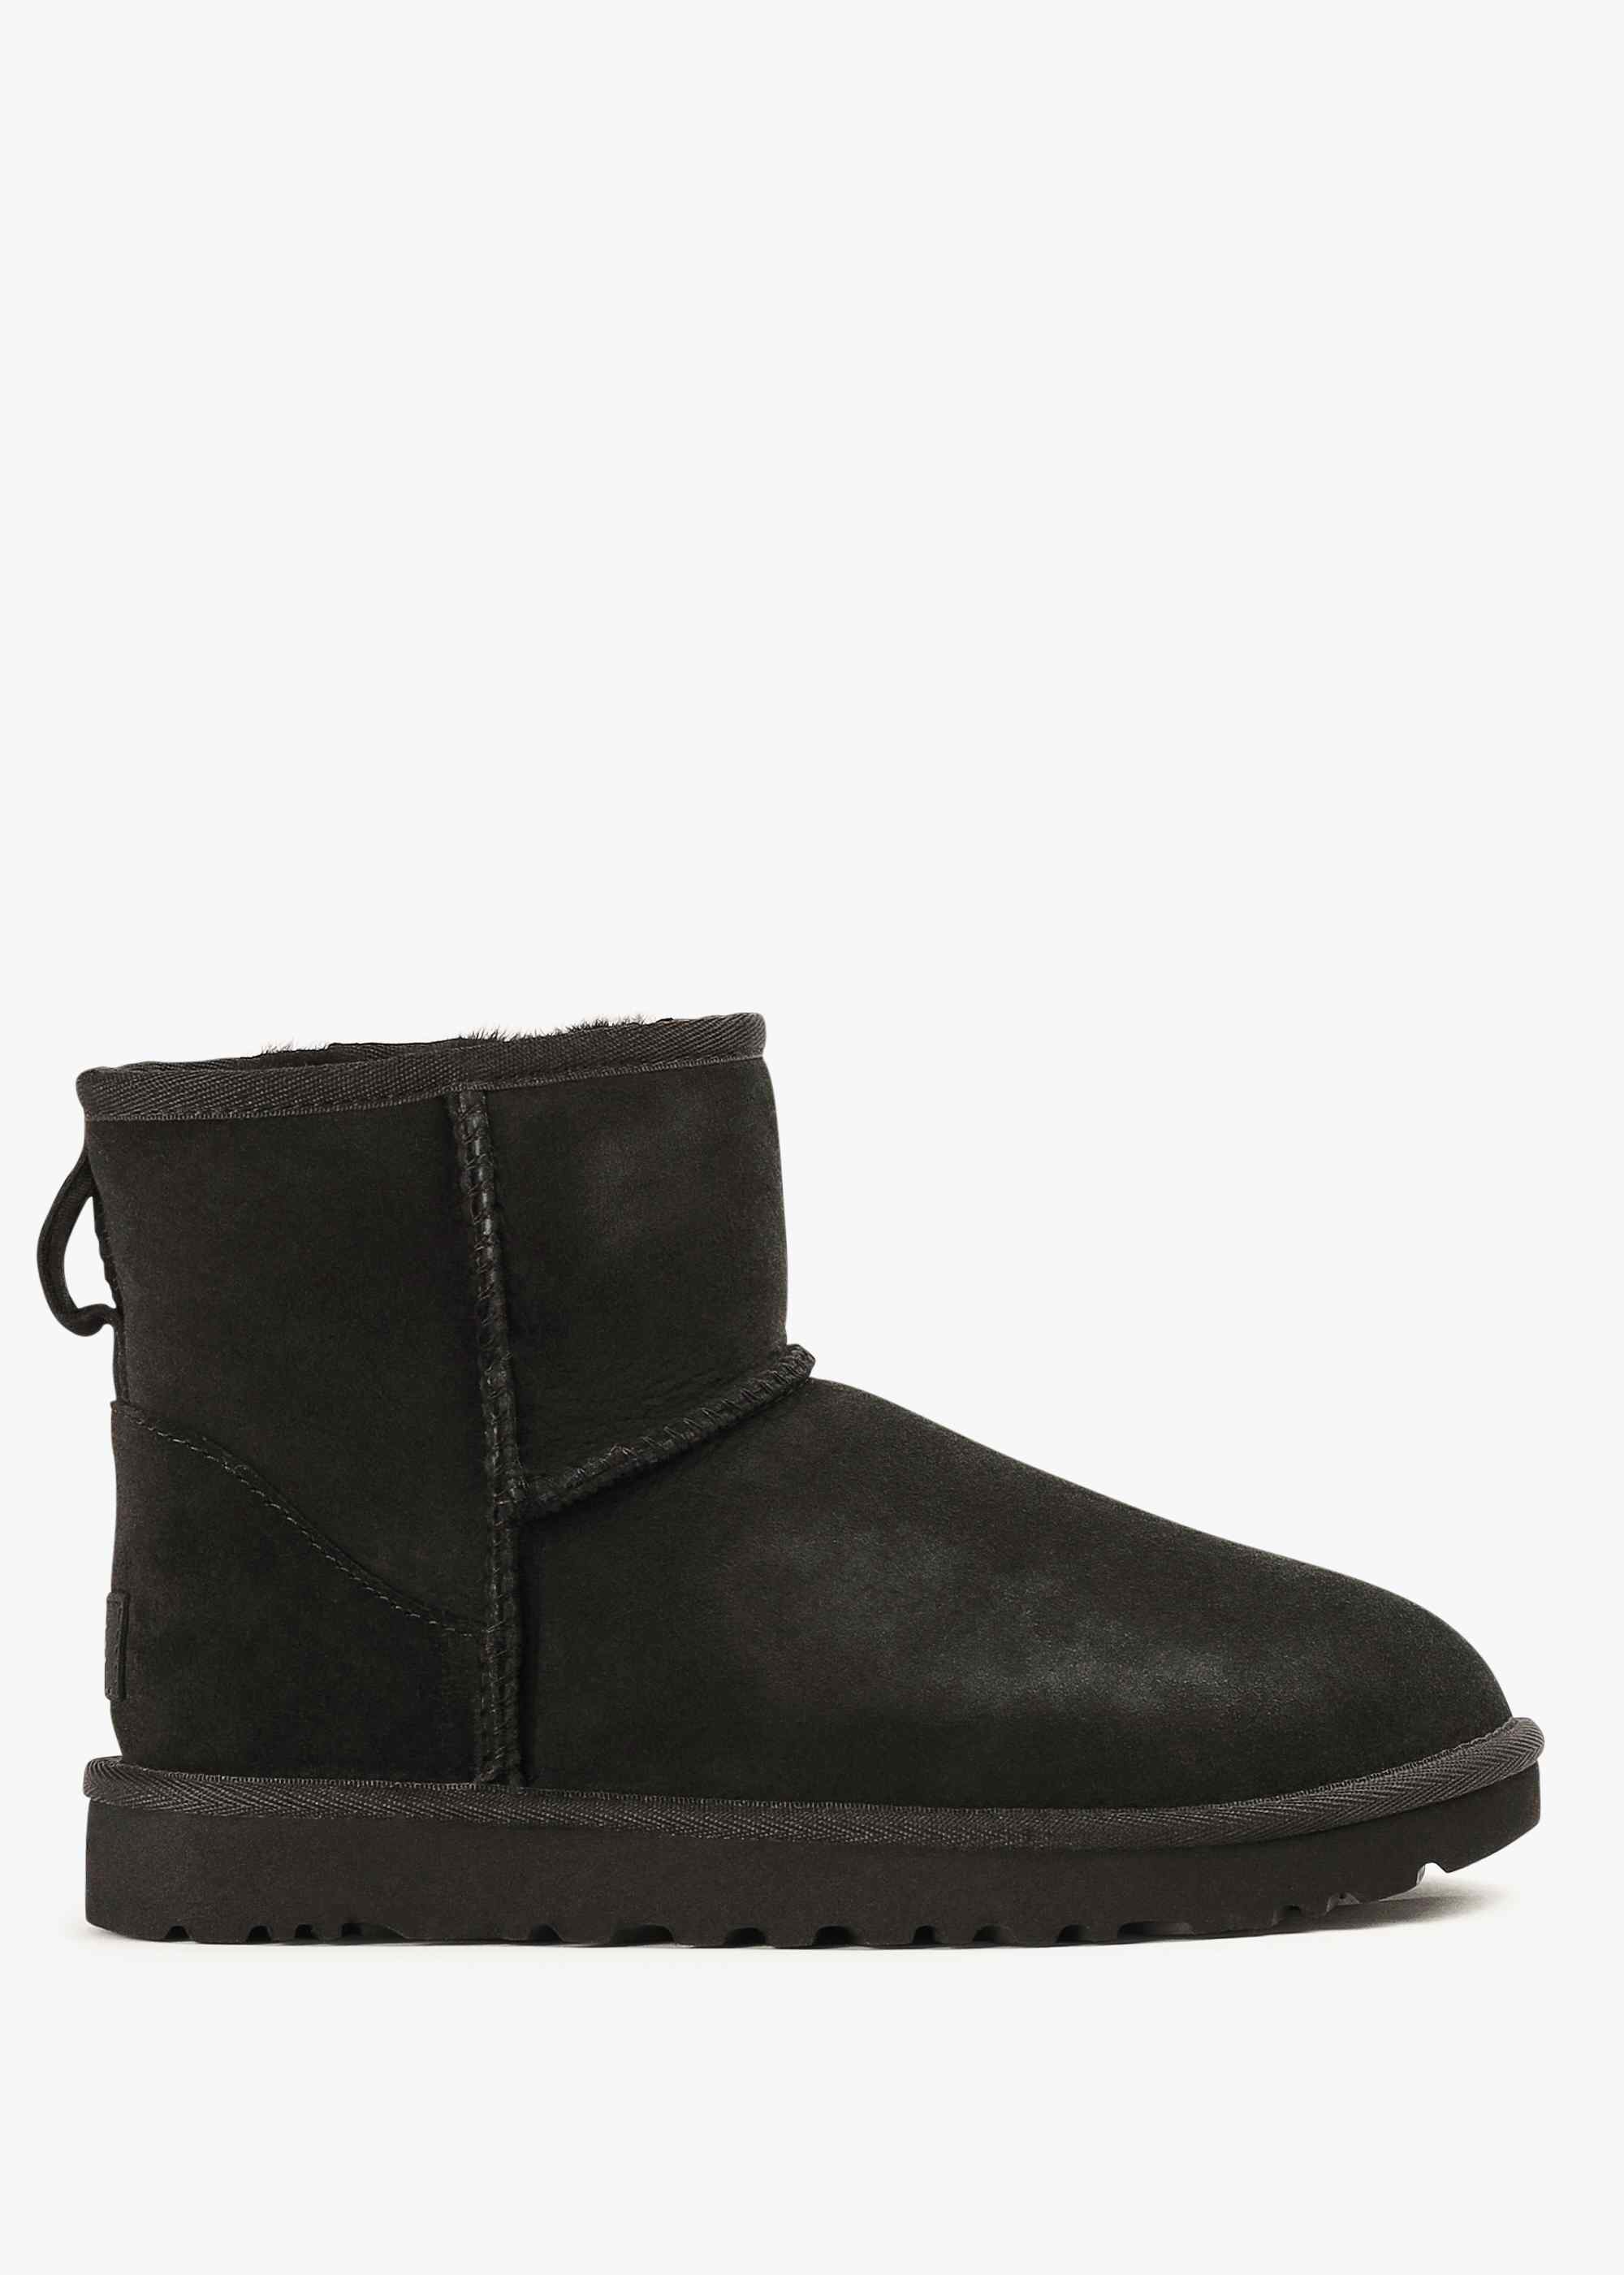 Image of Ugg Womens Classic Mini Boot In Black